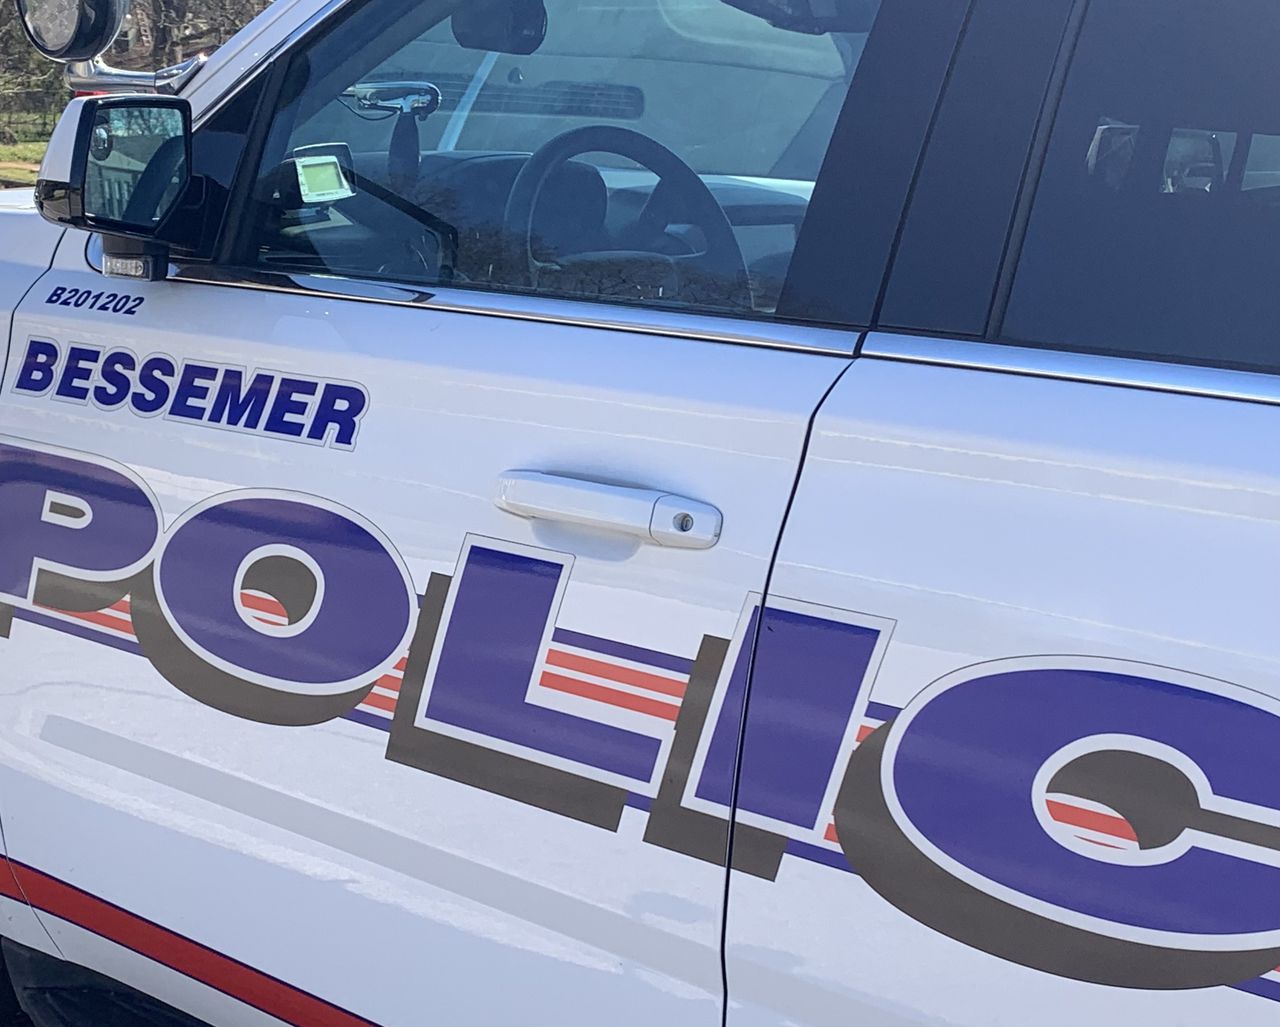 Child custody exchange at Bessemer park leads to shootout; 1